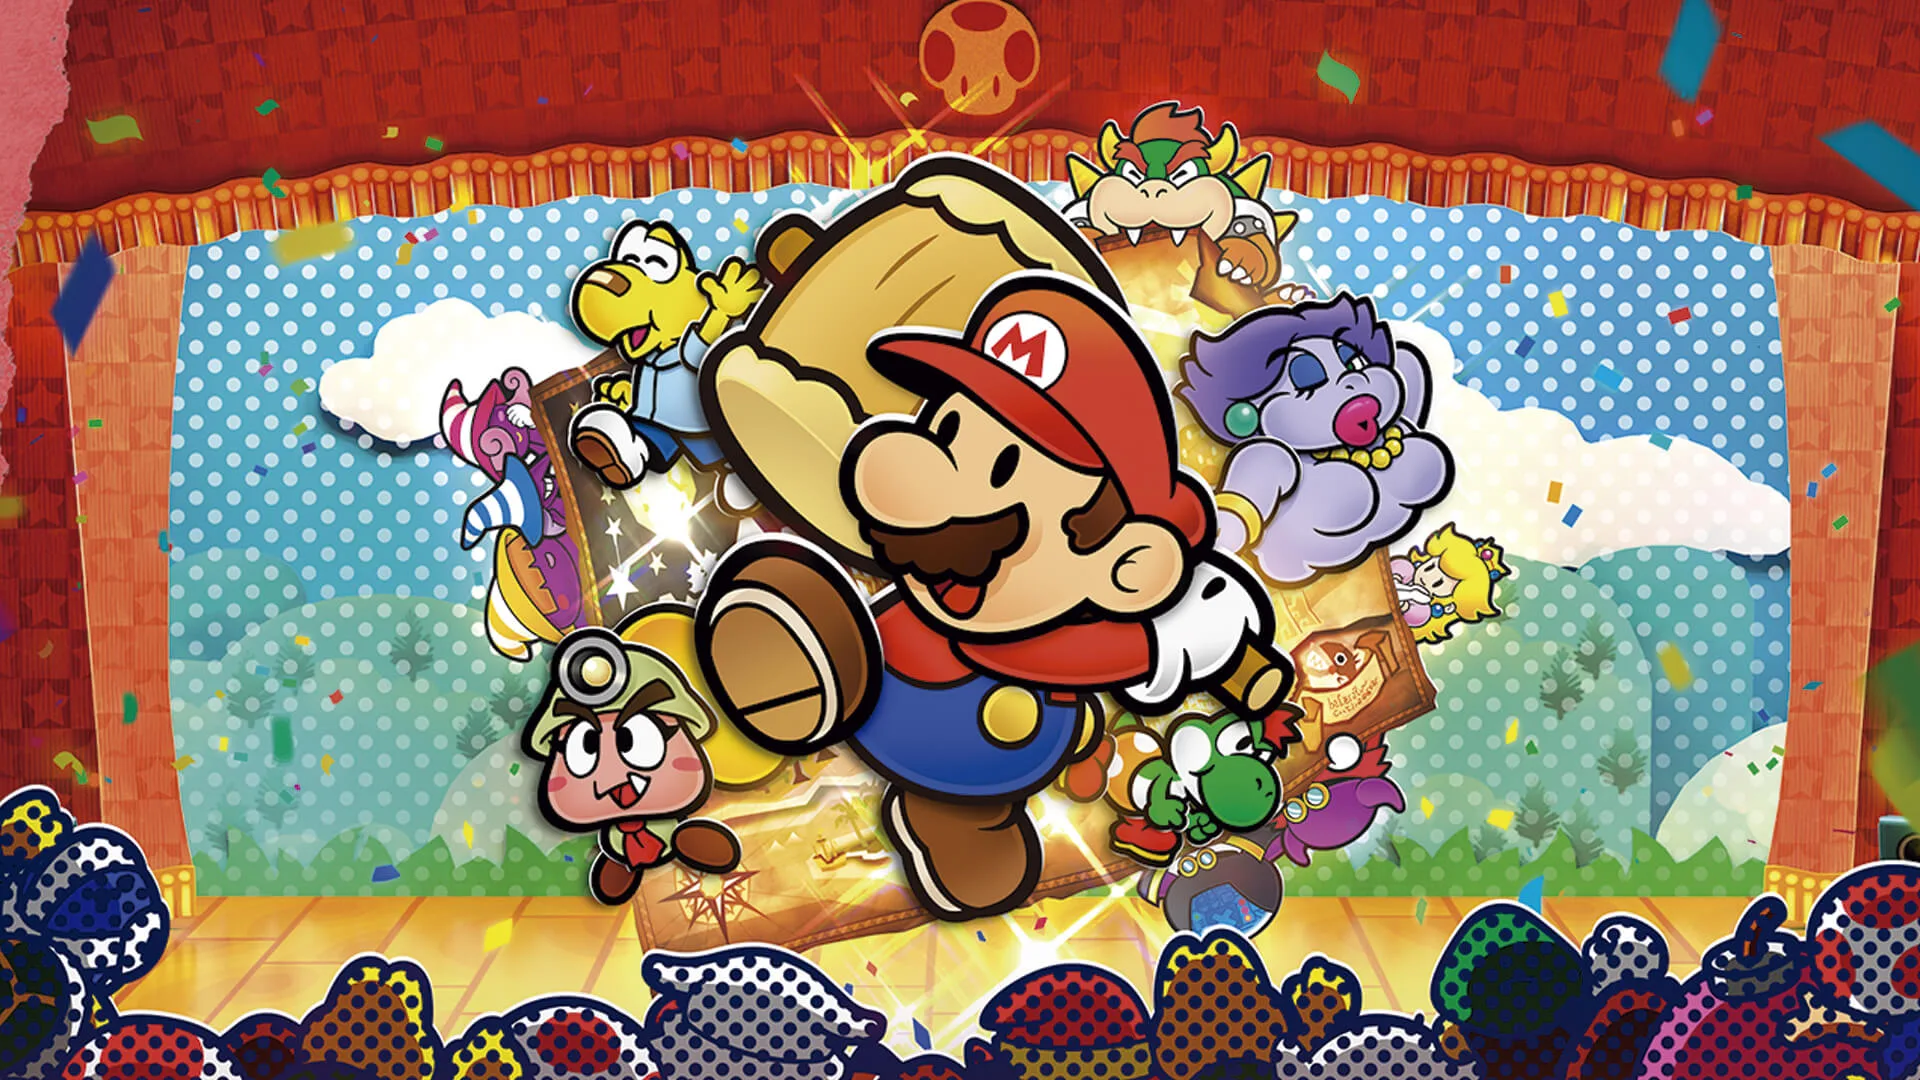 Review – Paper Mario: The Thousand-Year Door